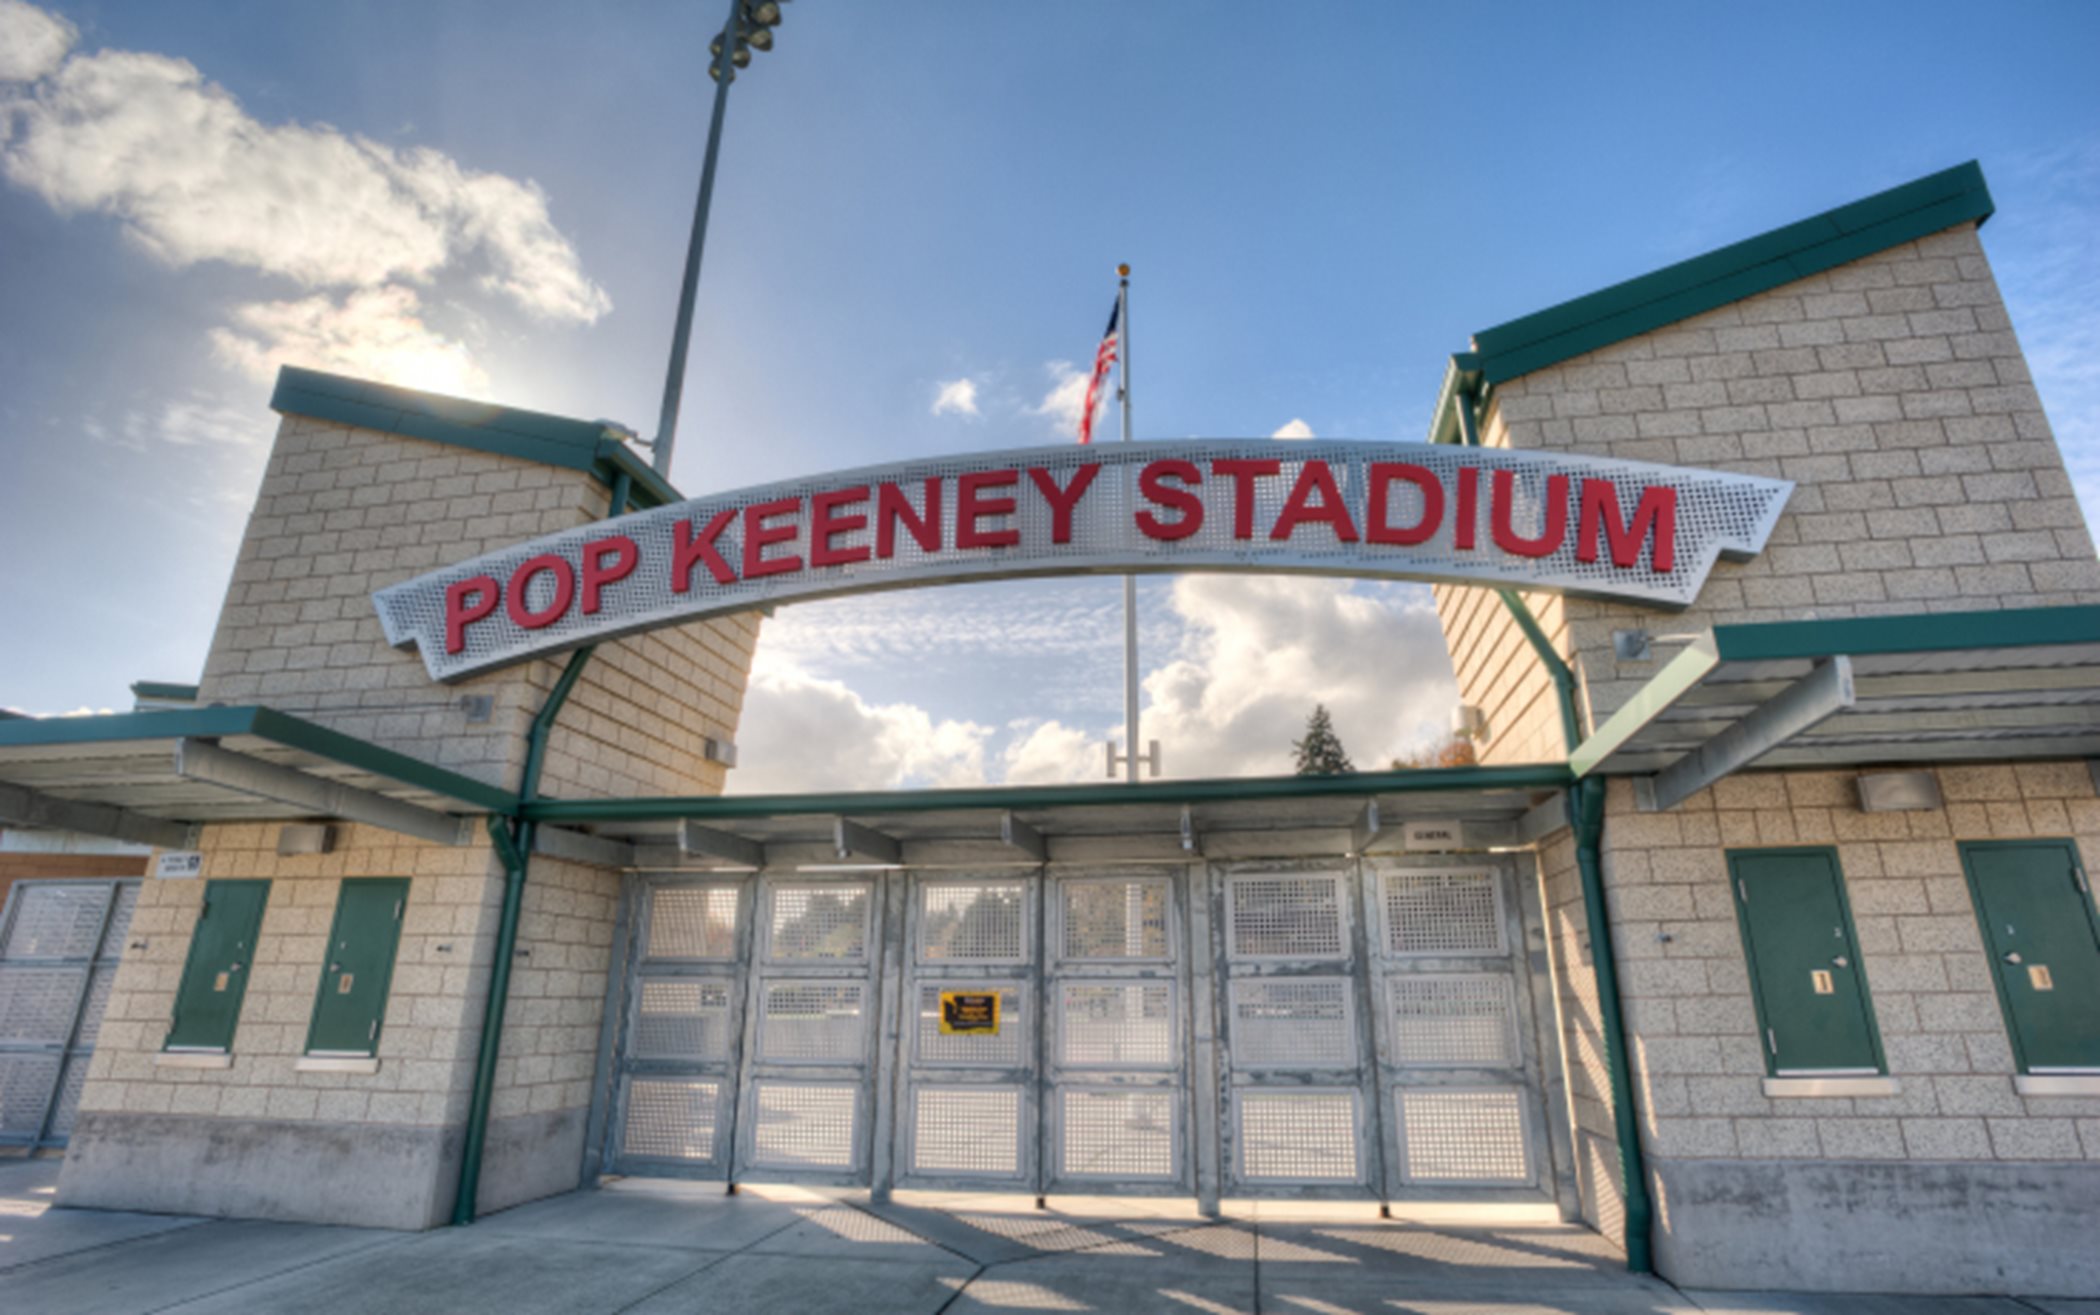 Pop Keeney Stadium hosts high school football and soccer games, numerous community events and concerts